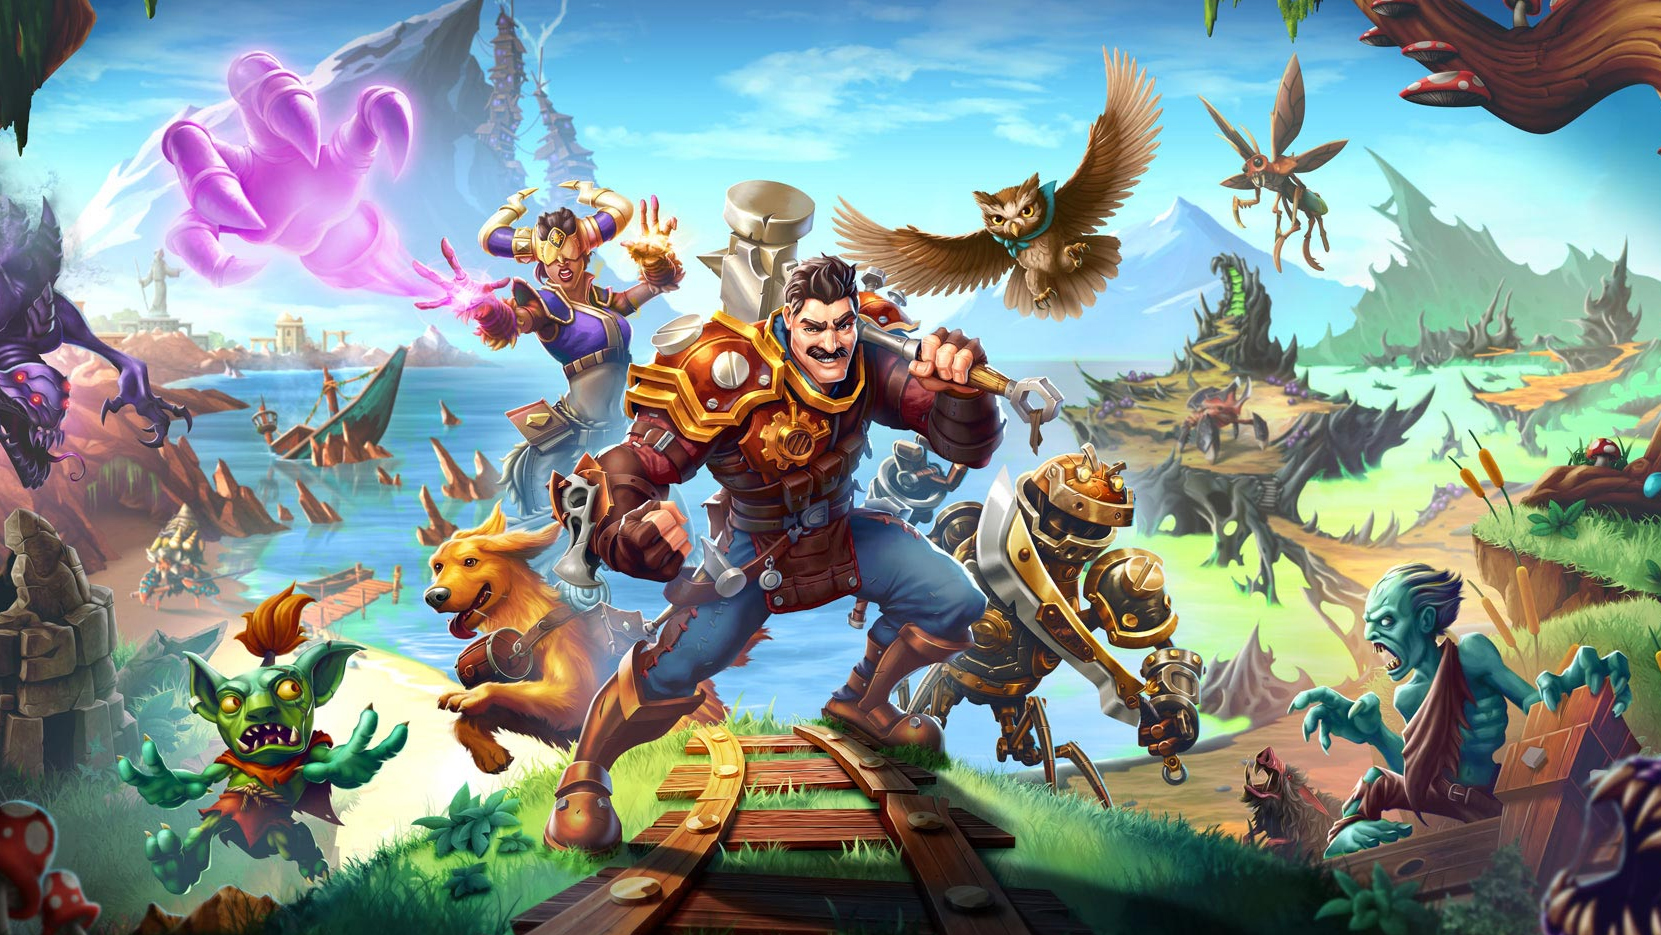 gaming news round-up - Torchlight 3 bought by Zynga